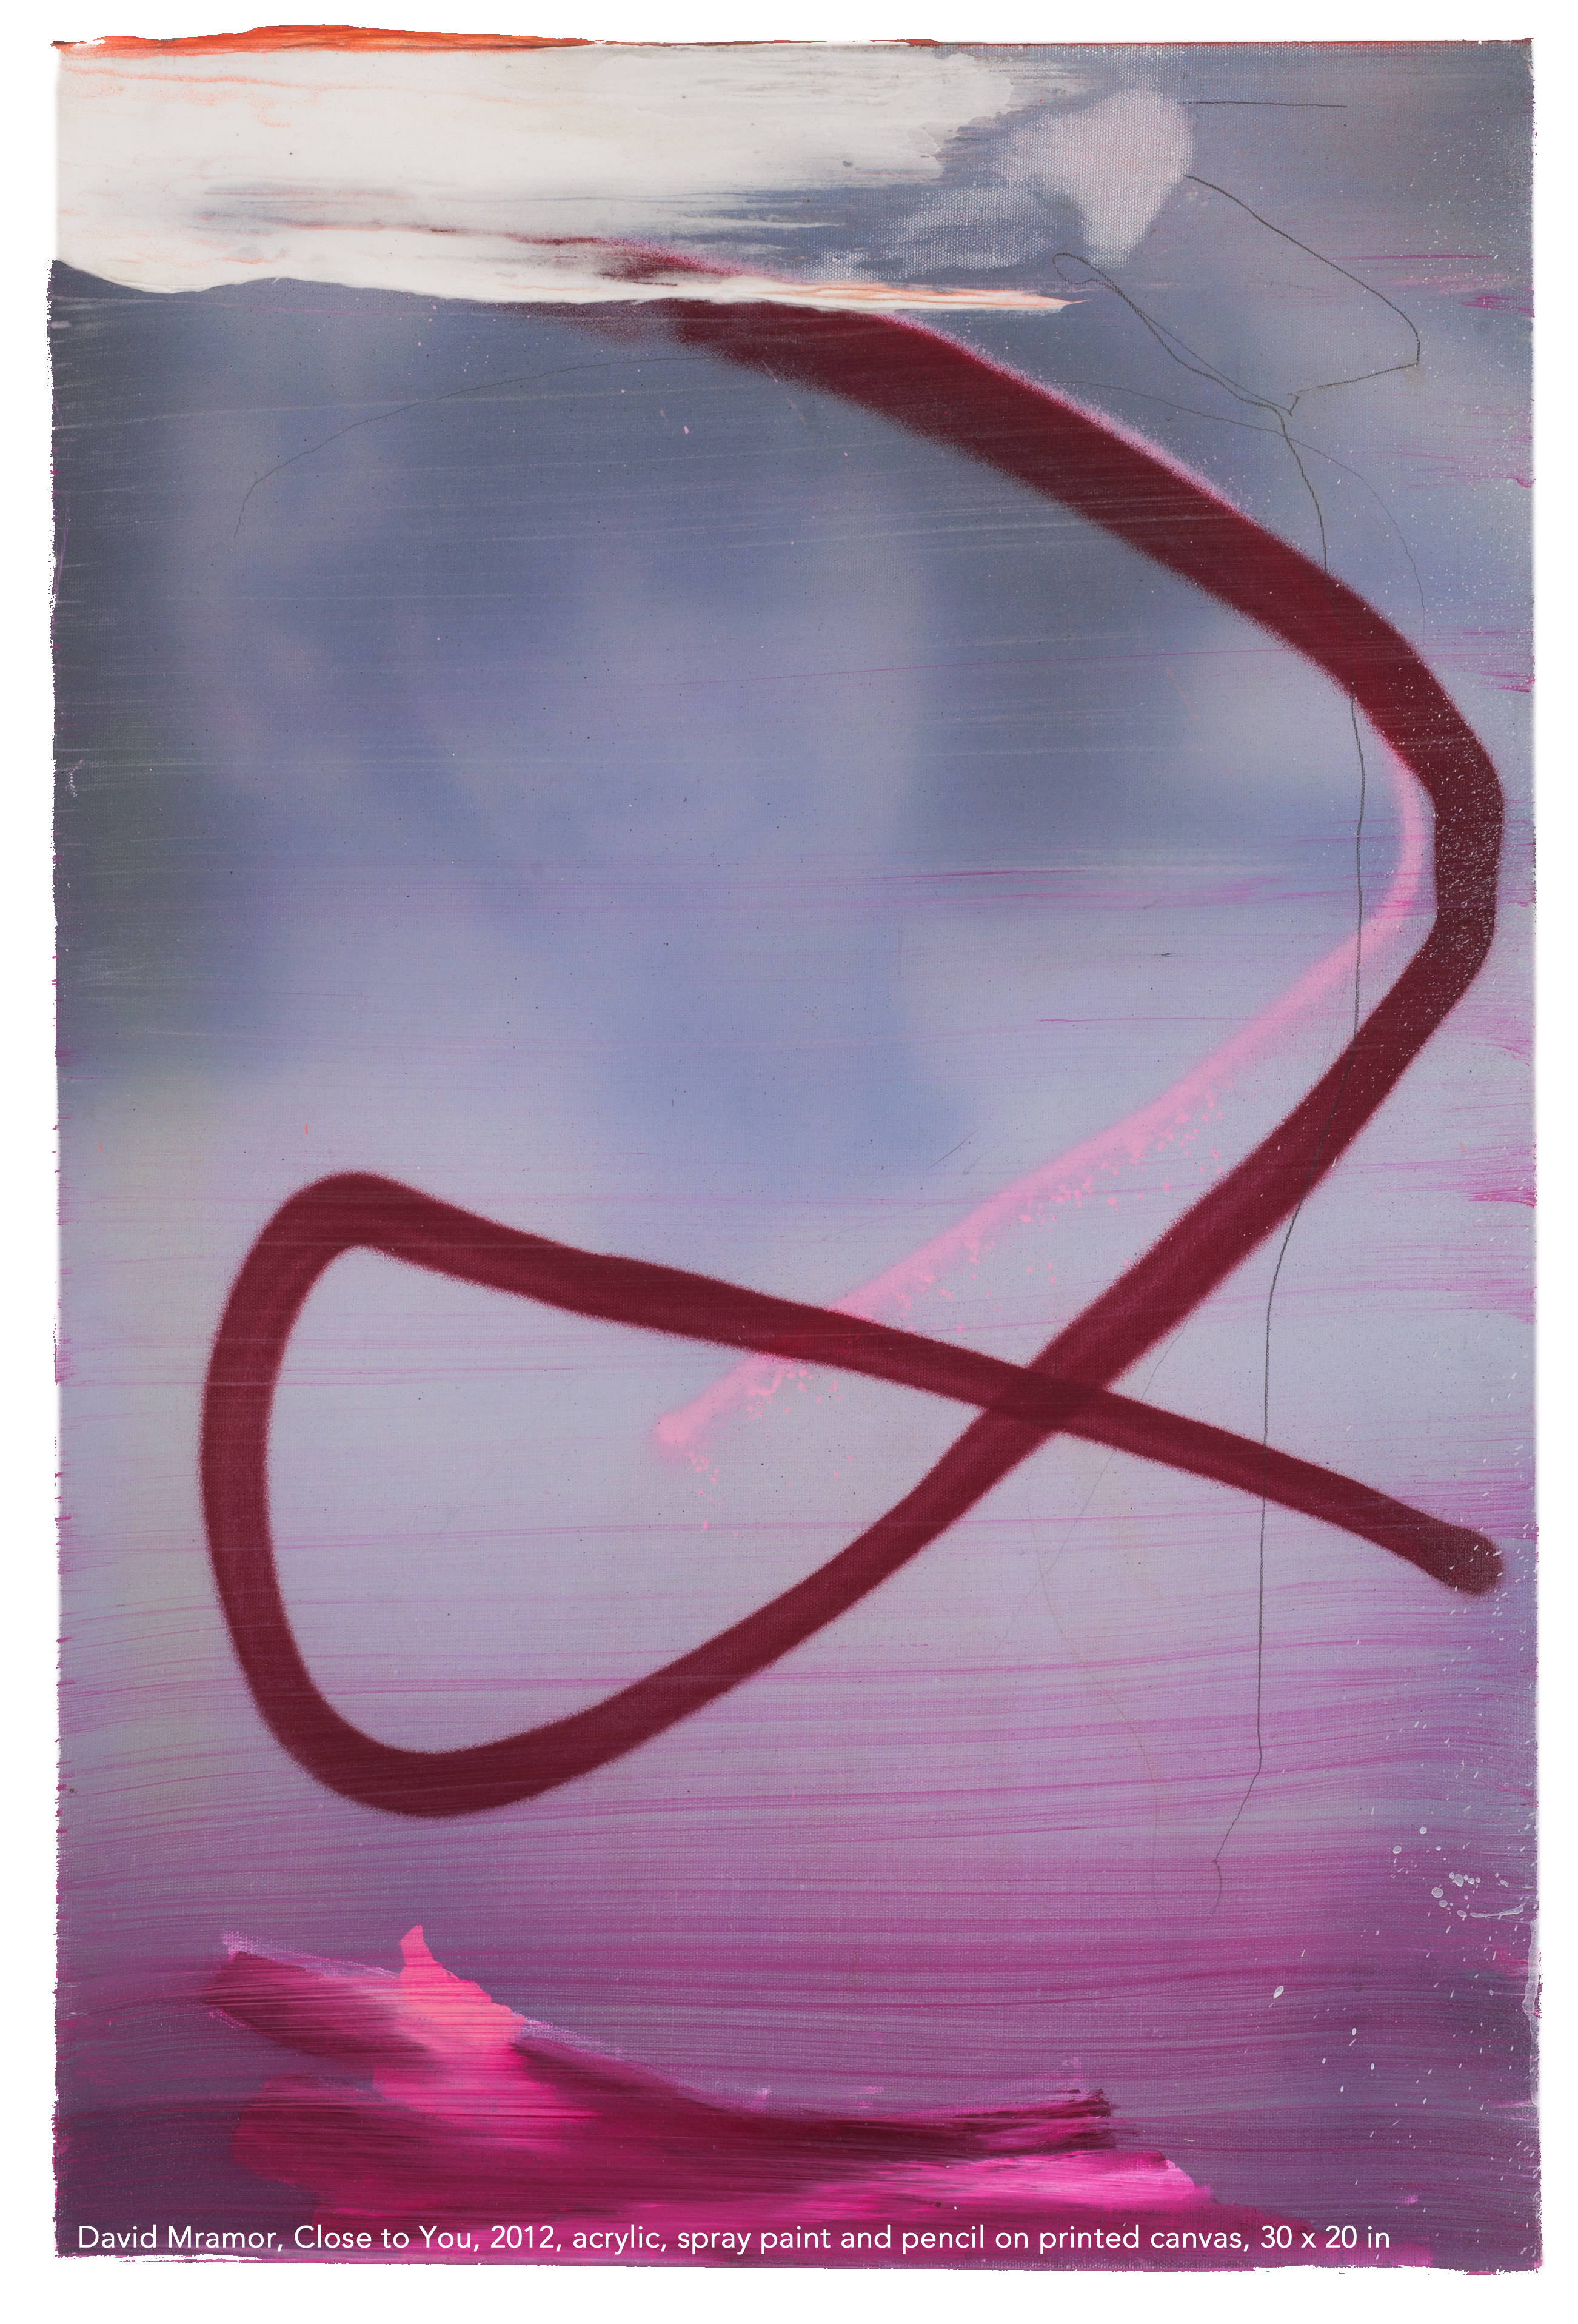 David Mramor , Close to You, 2012, acrylic, spray paint and pencil on printed canvas, 30 x 20 in